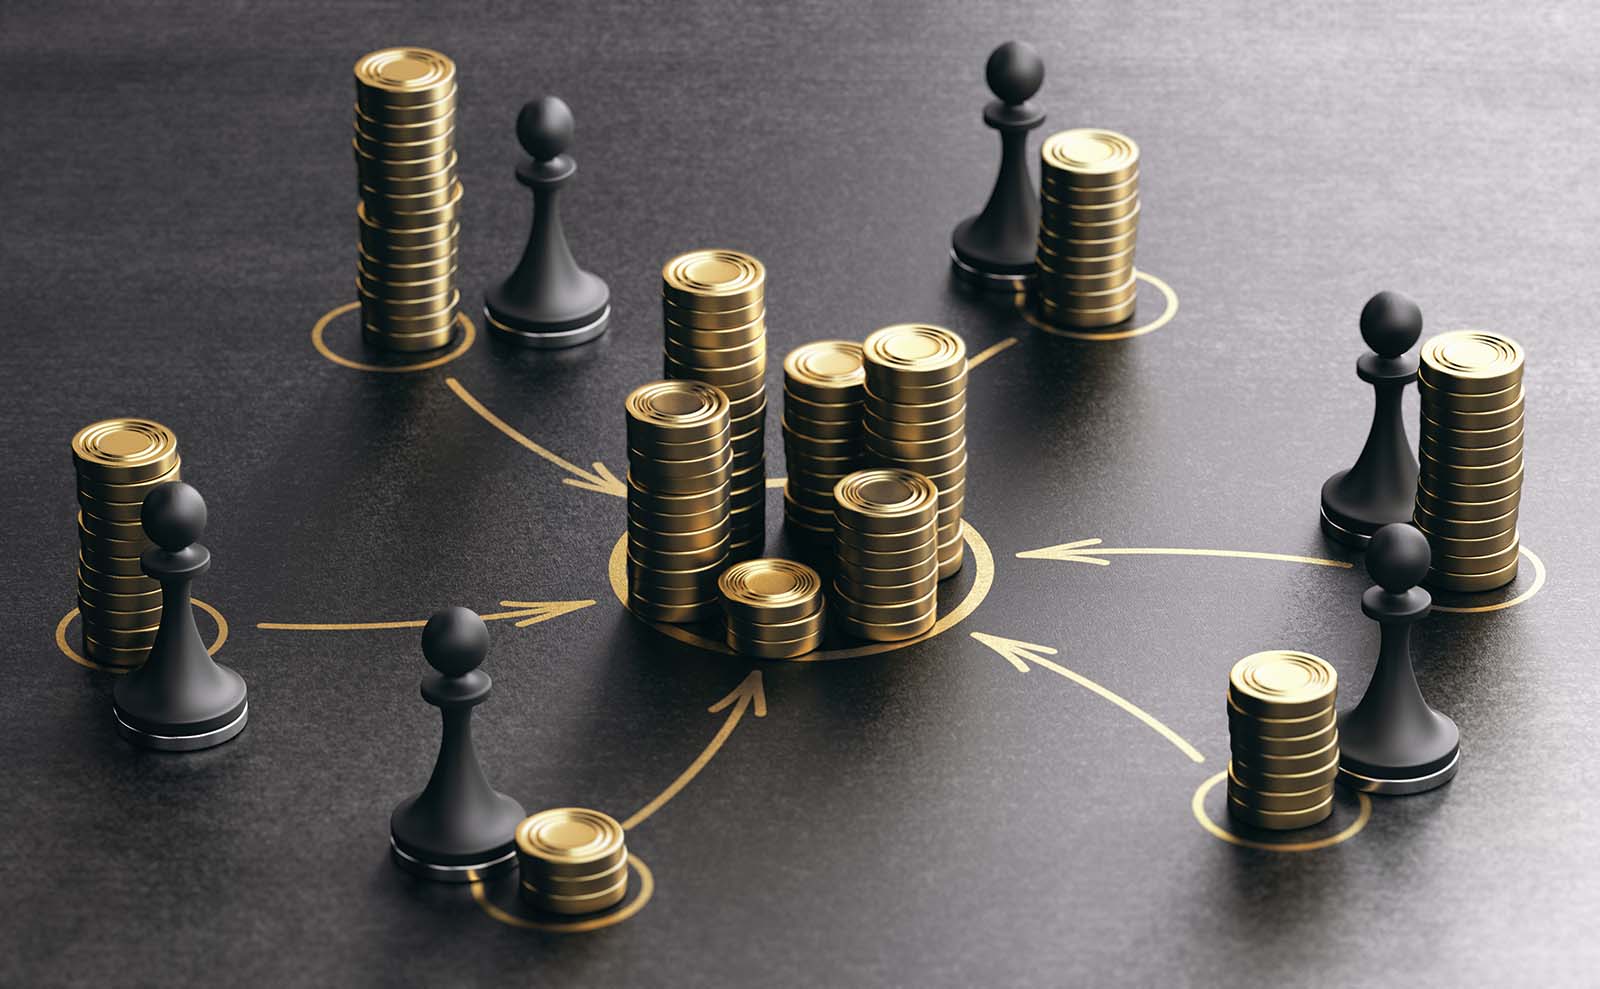 pawns and stacks of coins, each with an arrow leading to several coin stacks in the center